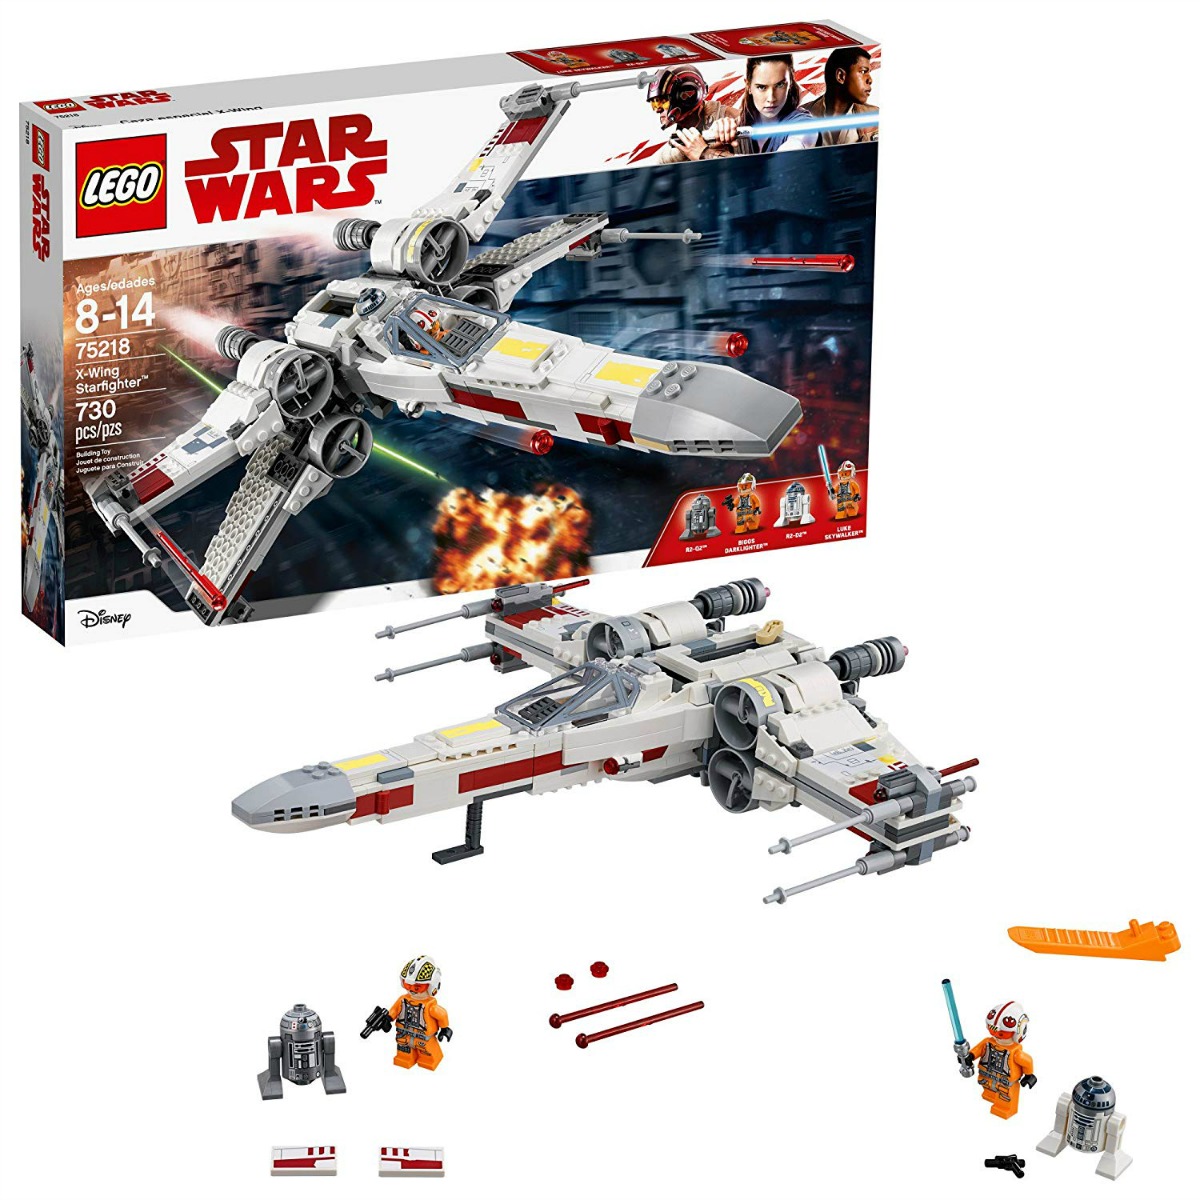 LEGO Star Wars X Wing Starfighter in and out of box